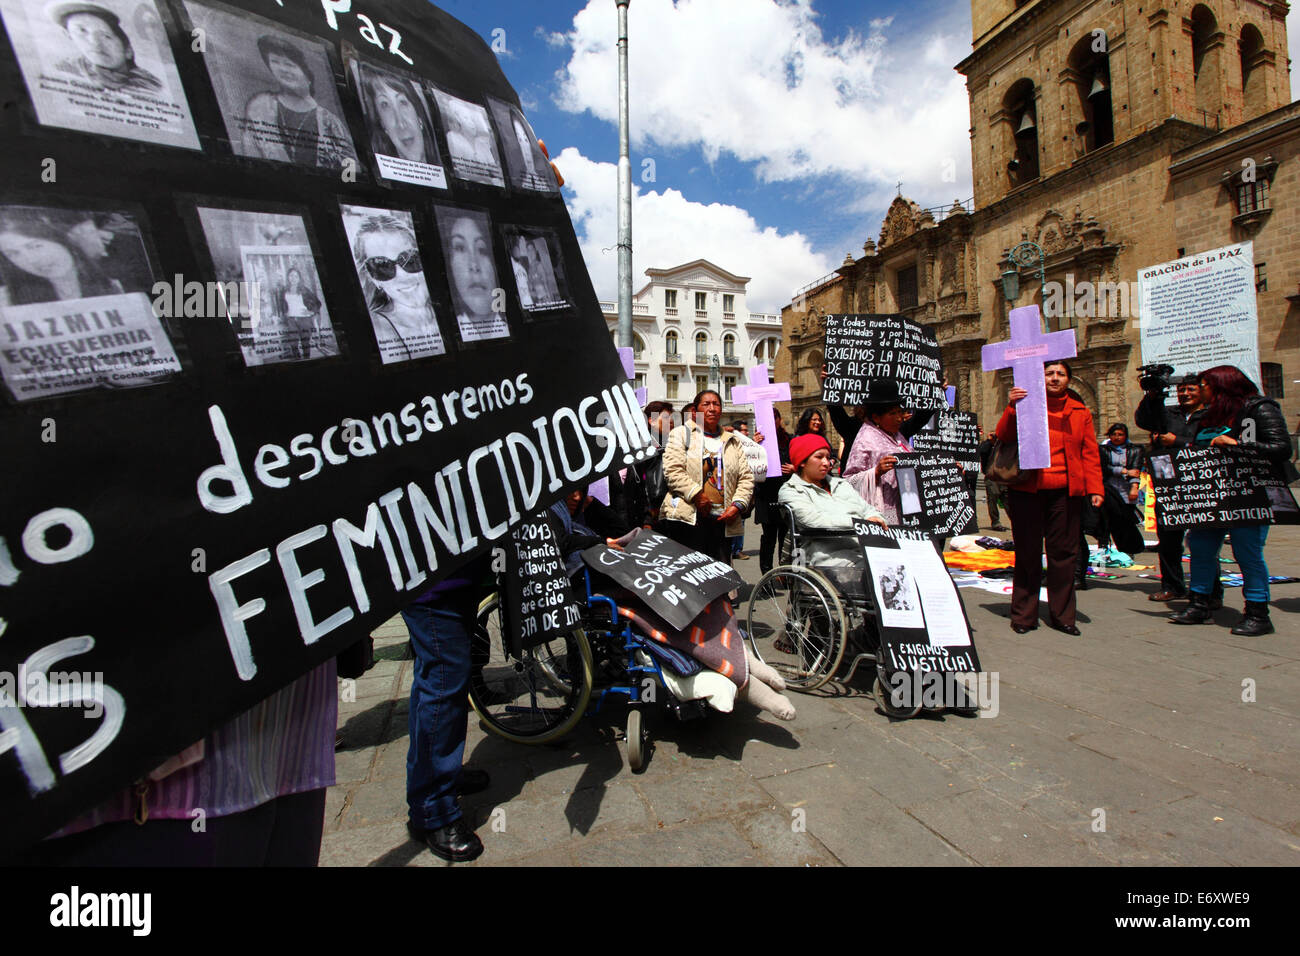 La Paz, Bolivia, 1st September 2014. A Womens Rights activist carries a placard with the photos and names of victims during a rally to protest against violence against women. The march was also to repudiate recent statements made by several candidates during the current election campaign that appear to minimise the problem and discriminate against women. According to a WHO report in January 2013 Bolivia is the country with the highest rate of violence against women in Latin America, there have been 453 cases of femicide since 2006 during the current government. Credit:  James Brunker/Alamy Liv Stock Photo